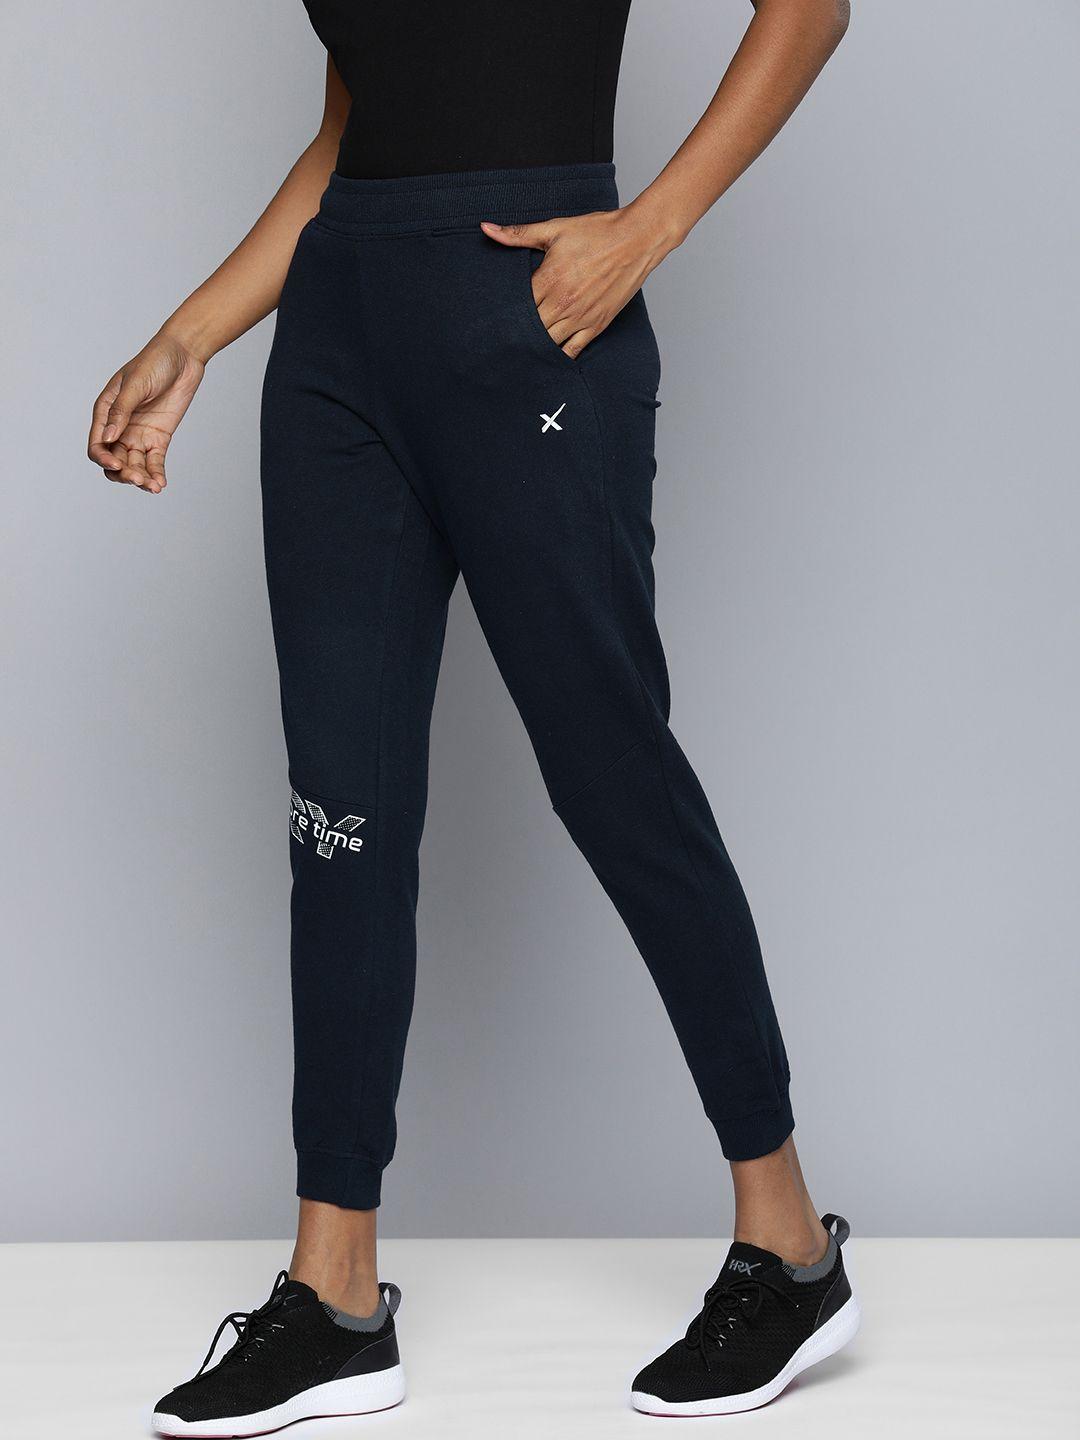 hrx by hrithik roshan women lifestyle graphic printed regular fit joggers